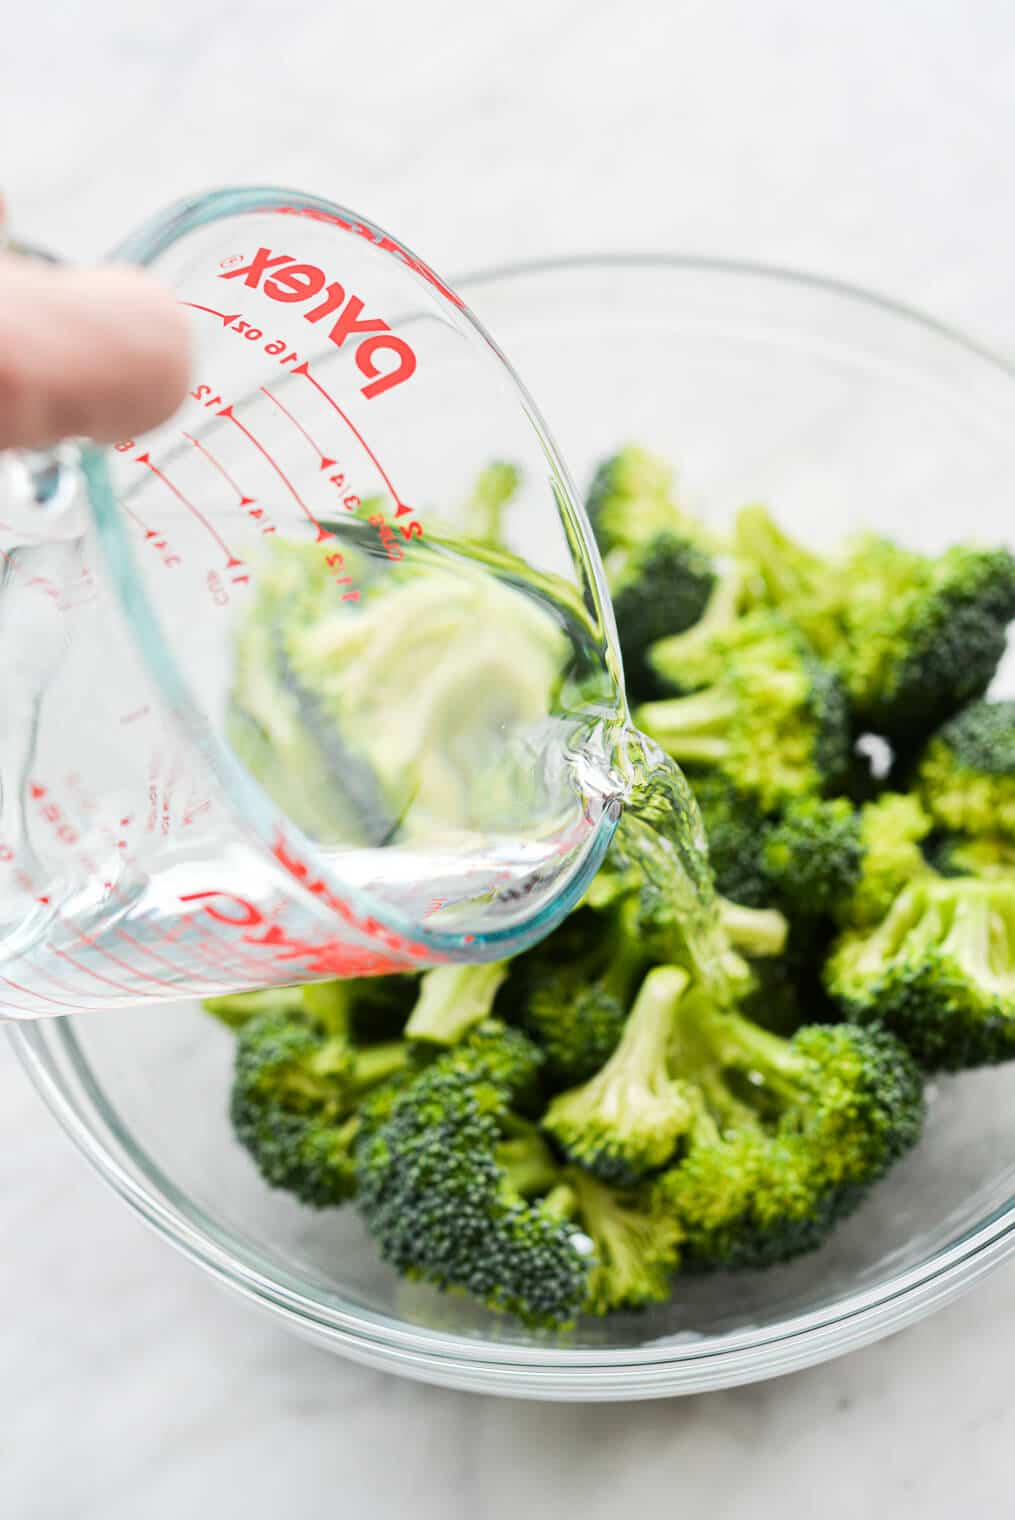 a person pouring water into a glass bowl of broccoli florets